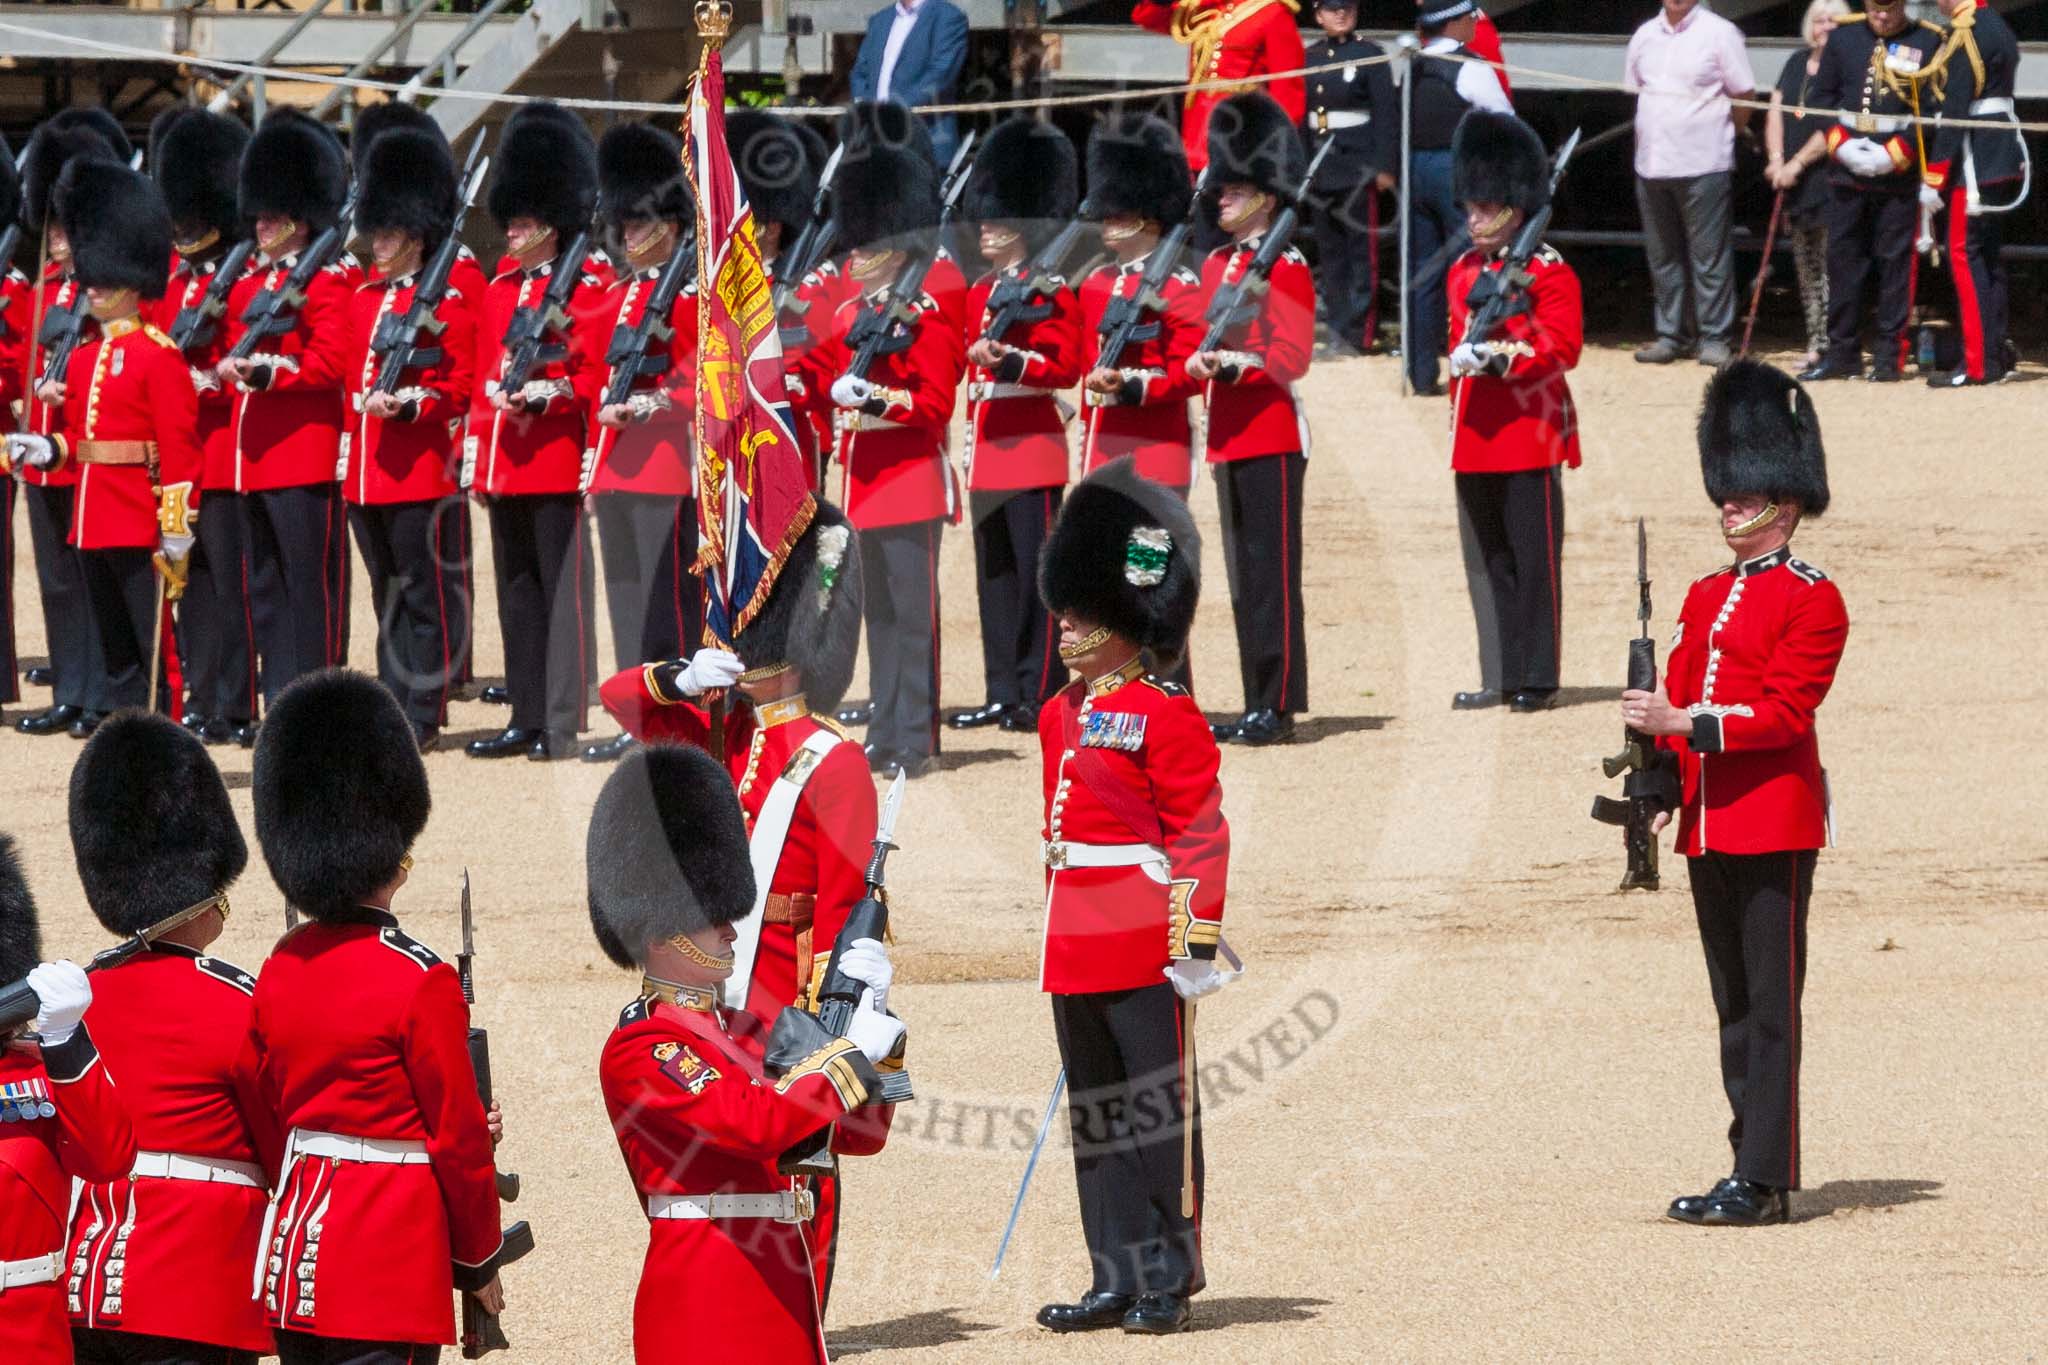 The Colonel's Review 2015.
Horse Guards Parade, Westminster,
London,

United Kingdom,
on 06 June 2015 at 11:20, image #315